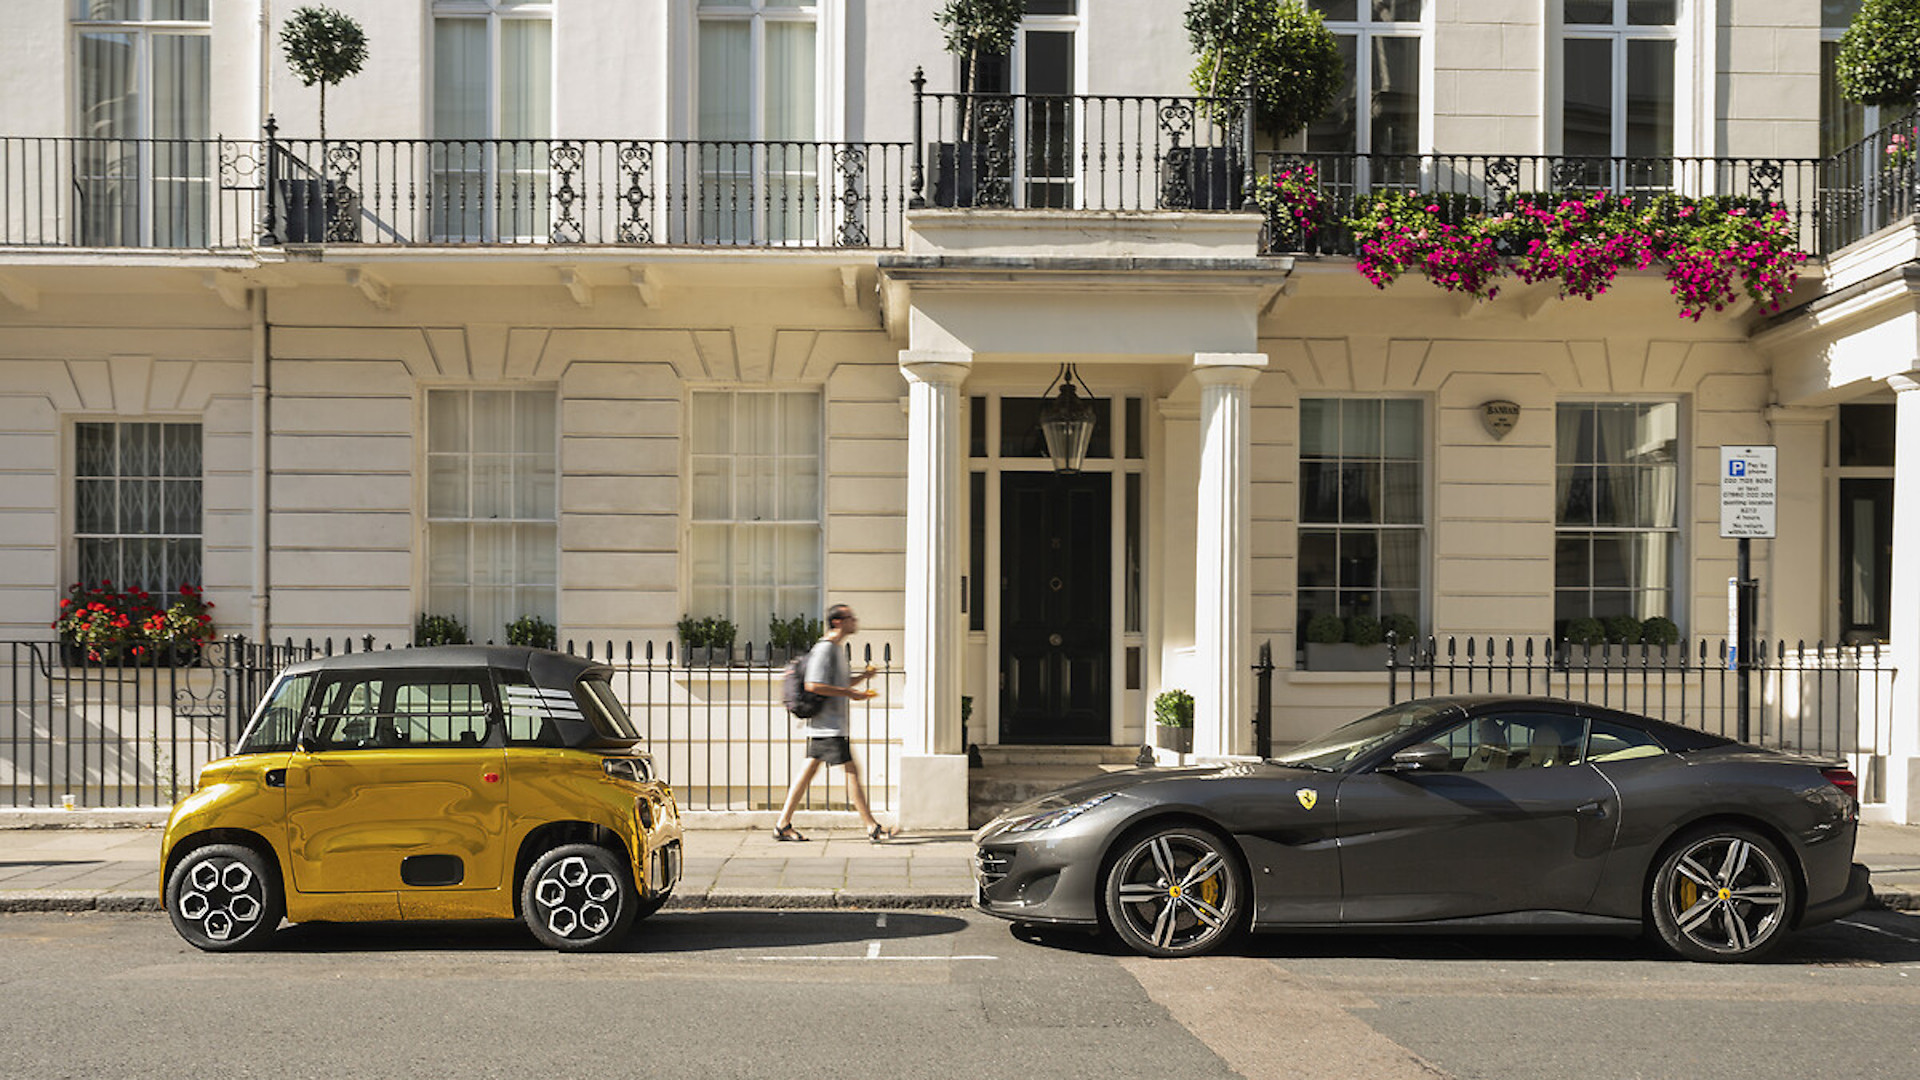 Gold wrapped Citroën Ami takes on London supercar scene